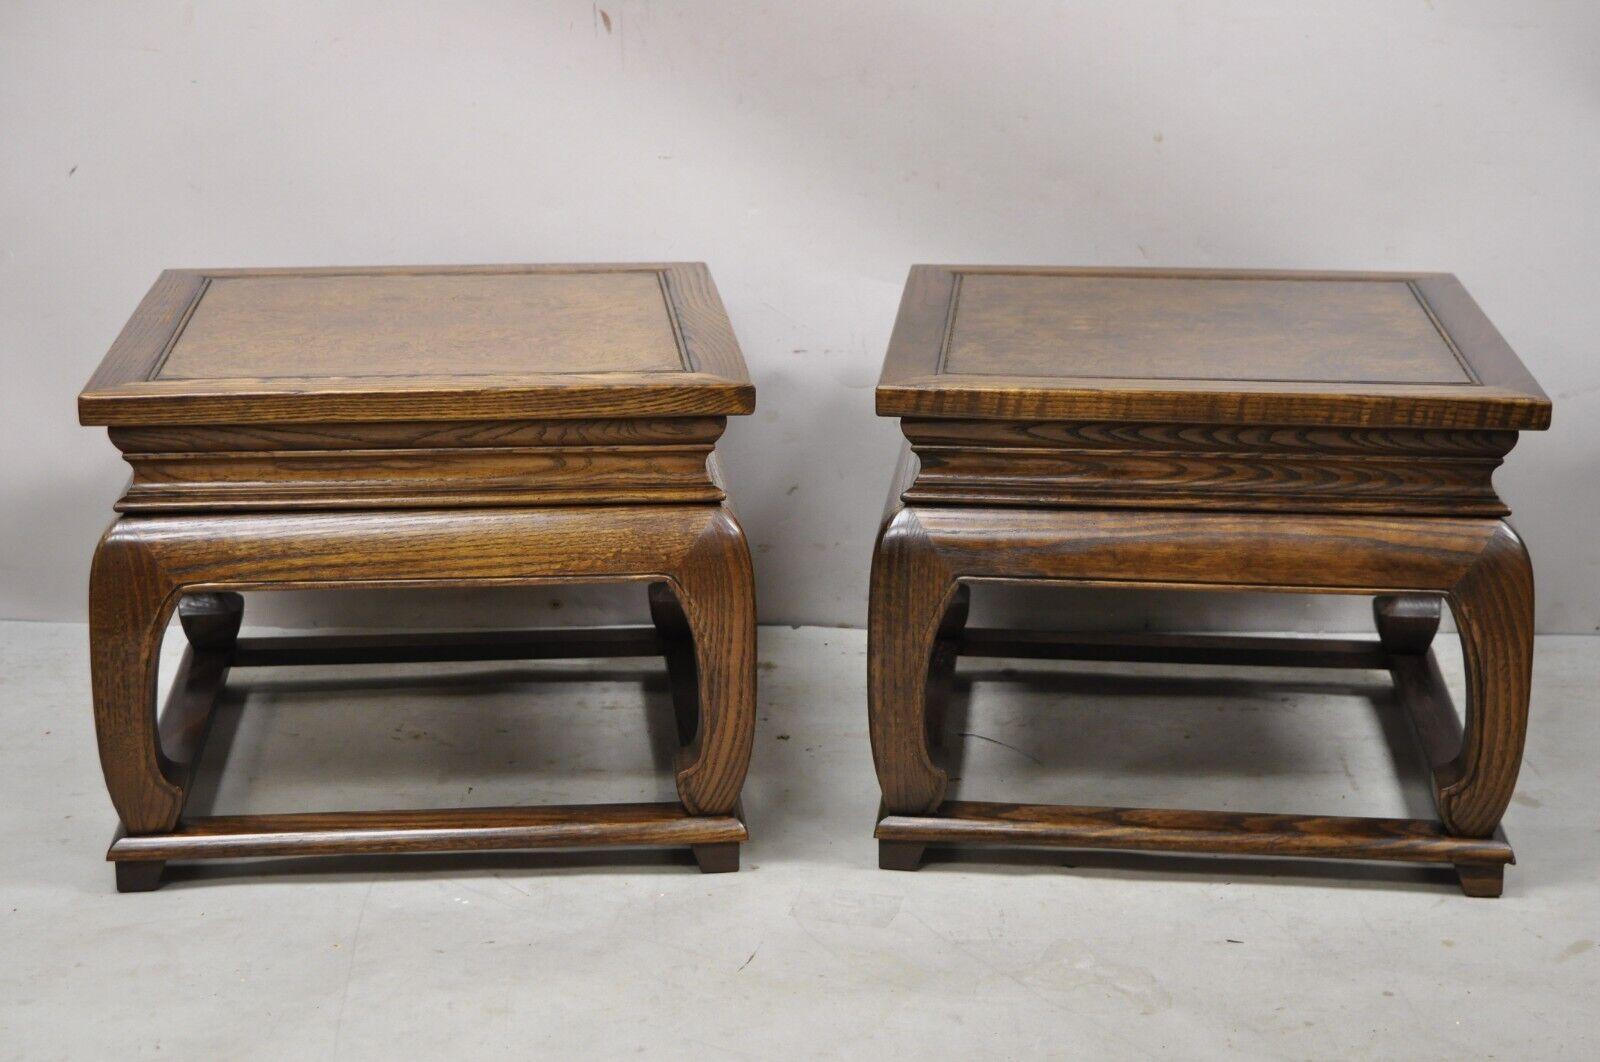 Pair vintage Chinoiserie style burl wood ming style low pedestal side end tables. Item features a low sleek form, stretcher bases, solid wood construction, beautiful wood grain, very nice vintage pair, quality American craftsmanship. Circa mid to